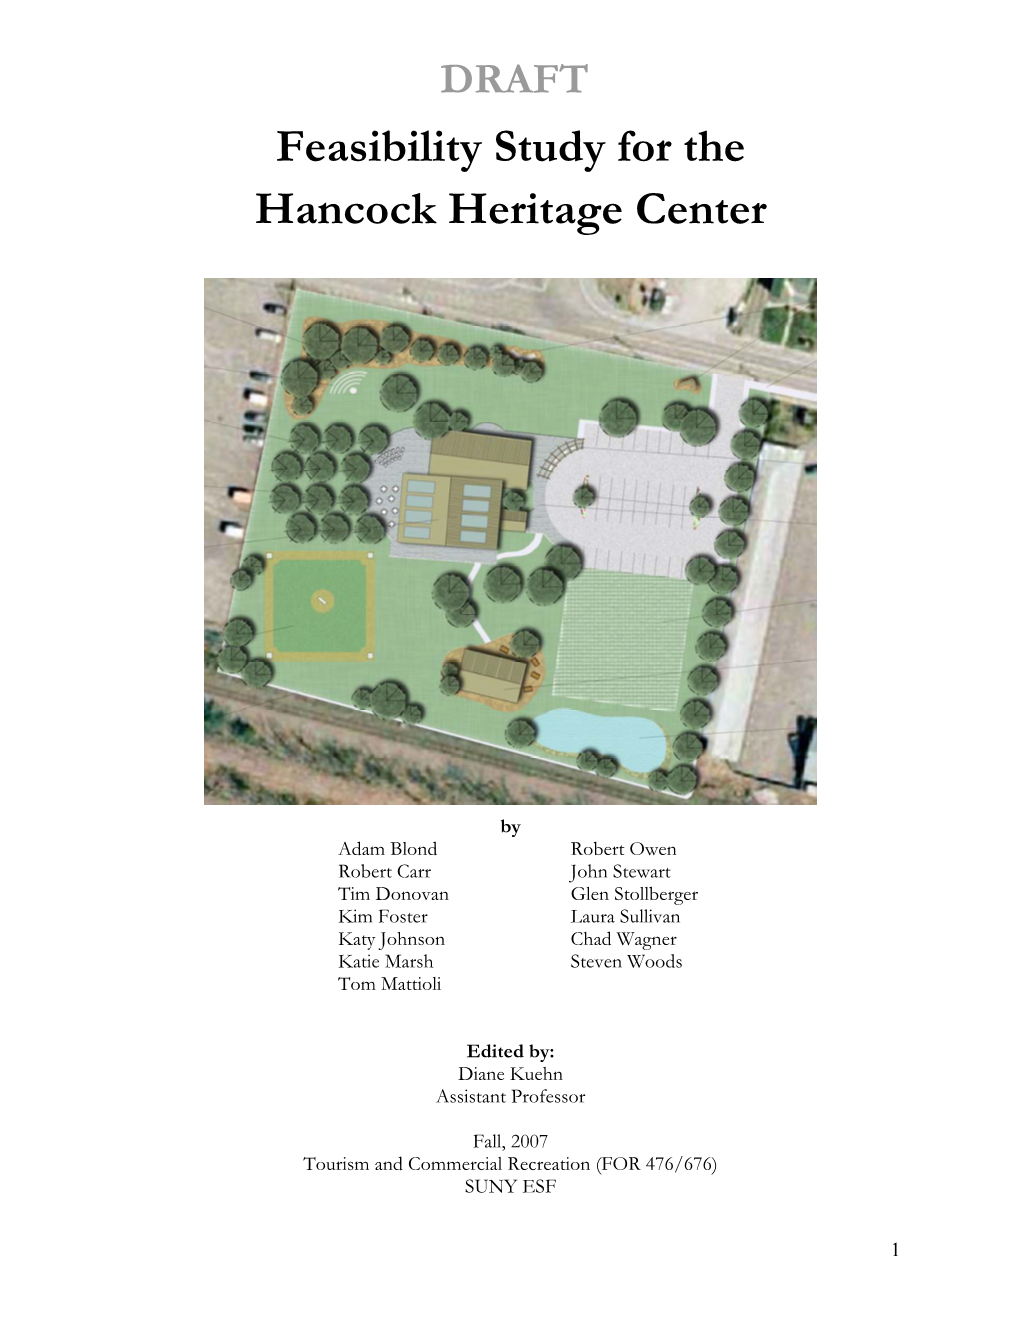 A Feasibility Study for the Hancock Heritage Center